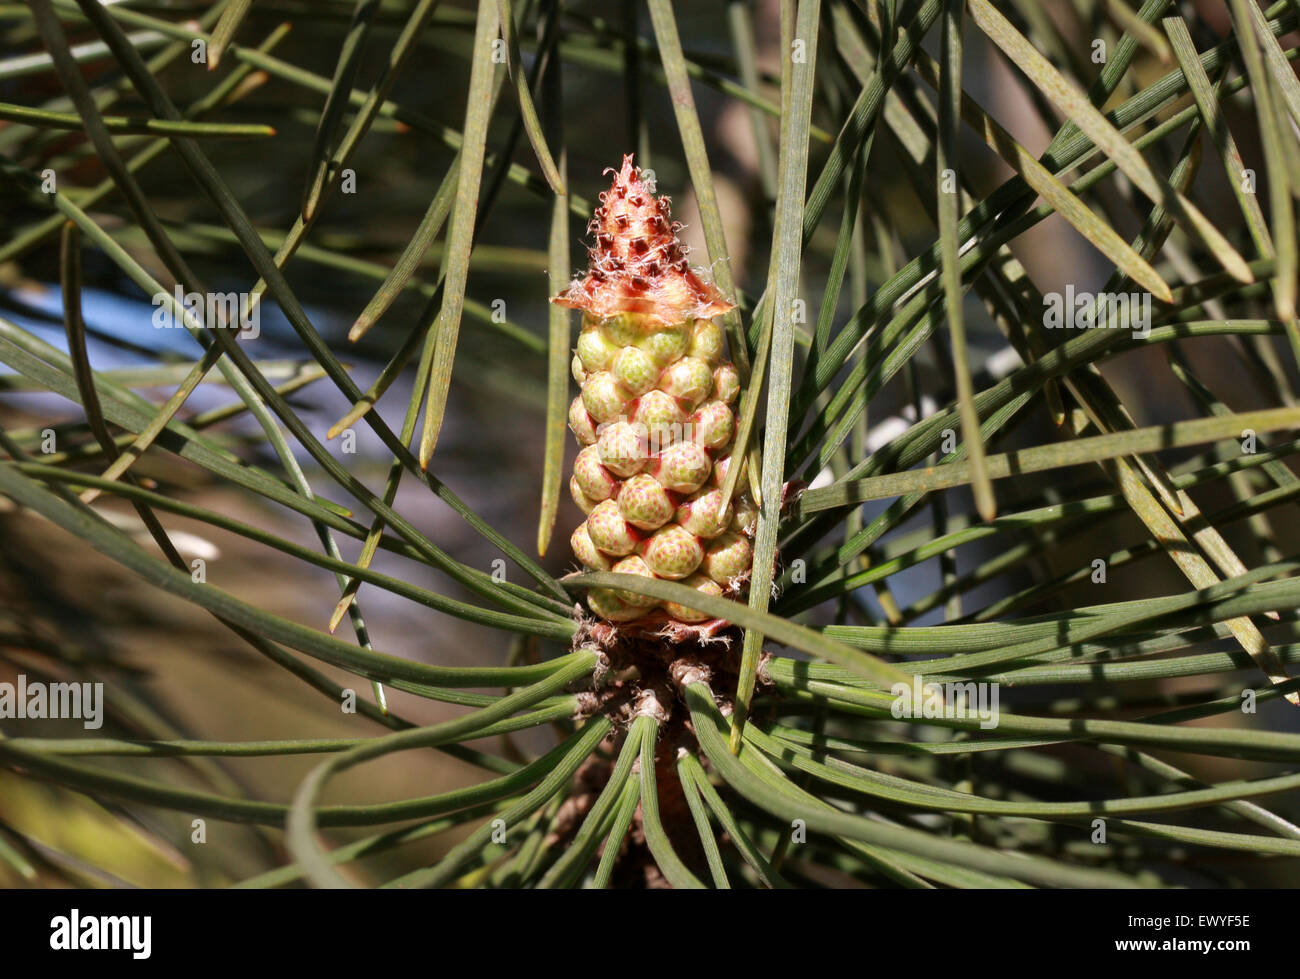 Maritime Pine, Pinus pinaster, Pinaceae. South and West Europe and North Africa. Stock Photo